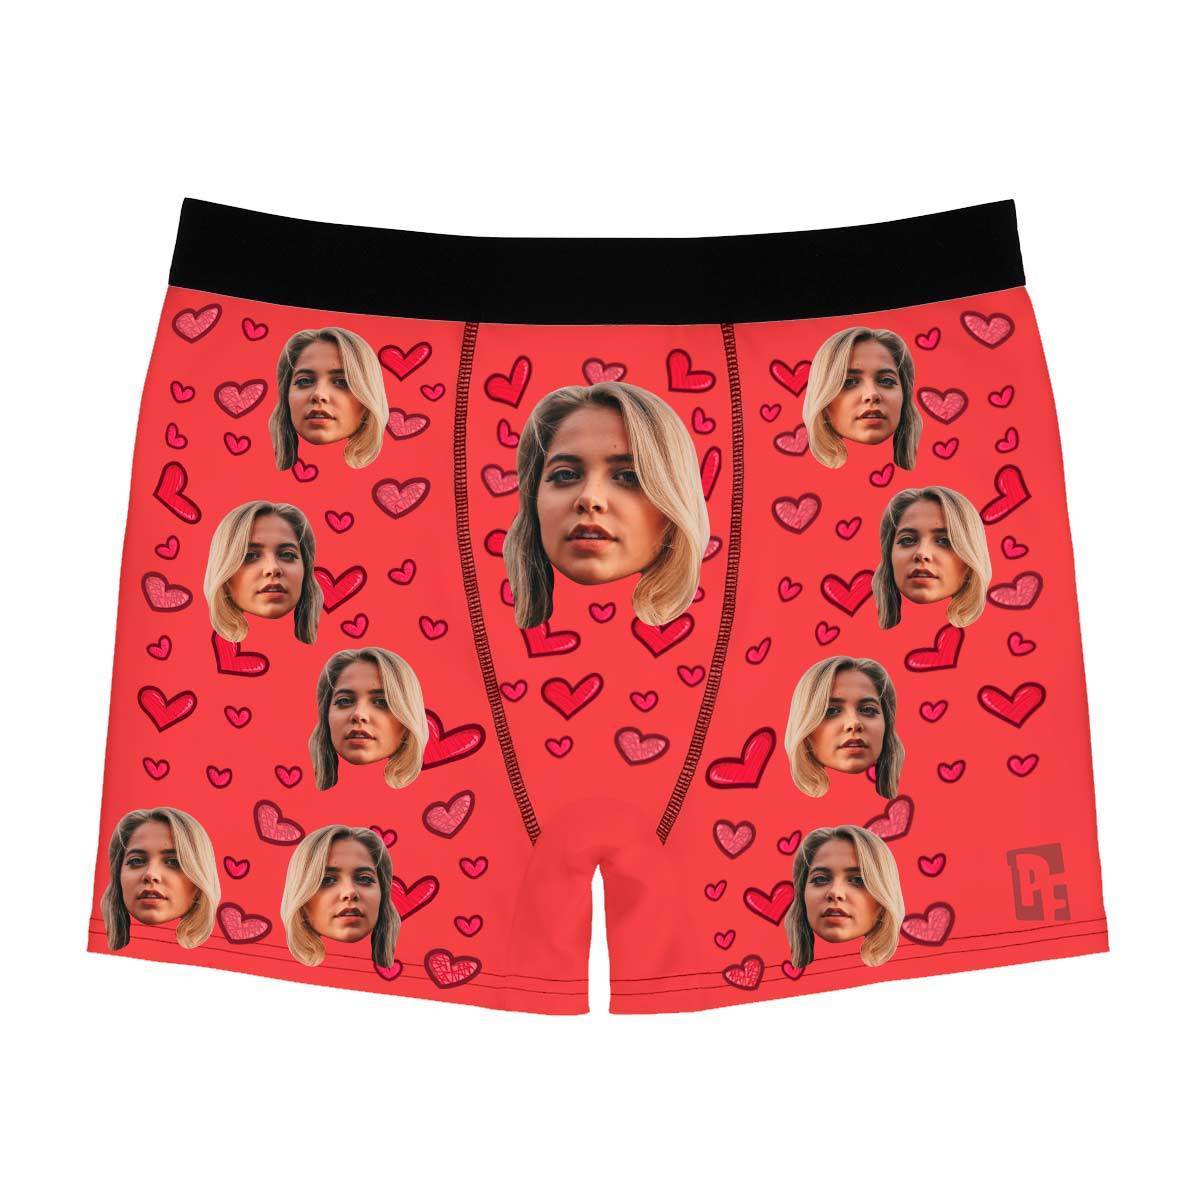 Mint Heart men's boxer briefs personalized with photo printed on them